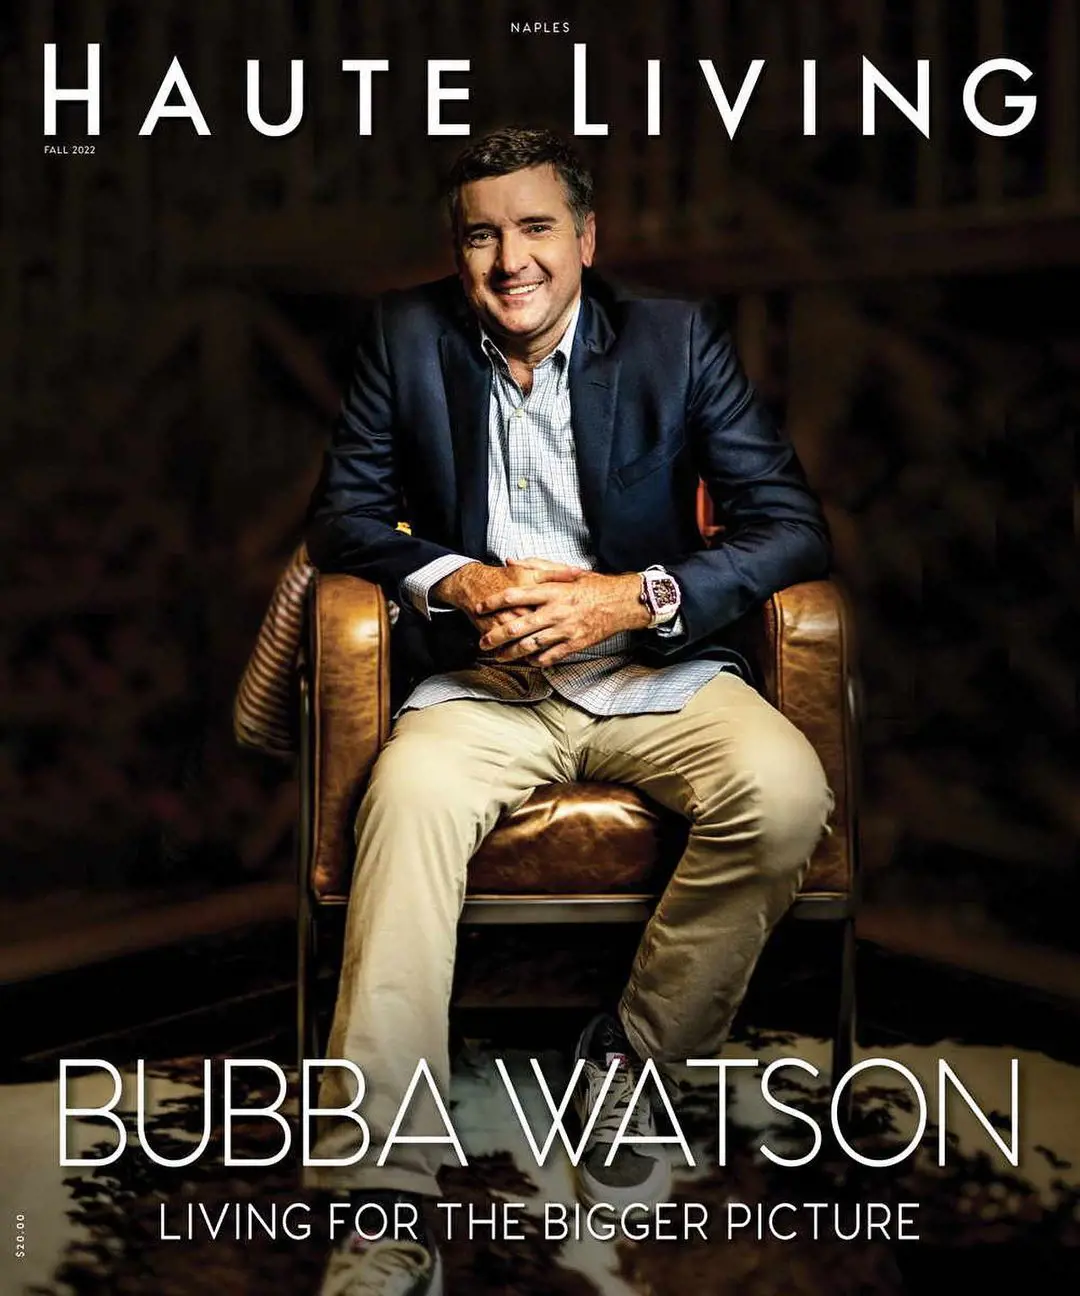 Watson featured on the cover of Haute Living magazine in October 2022.